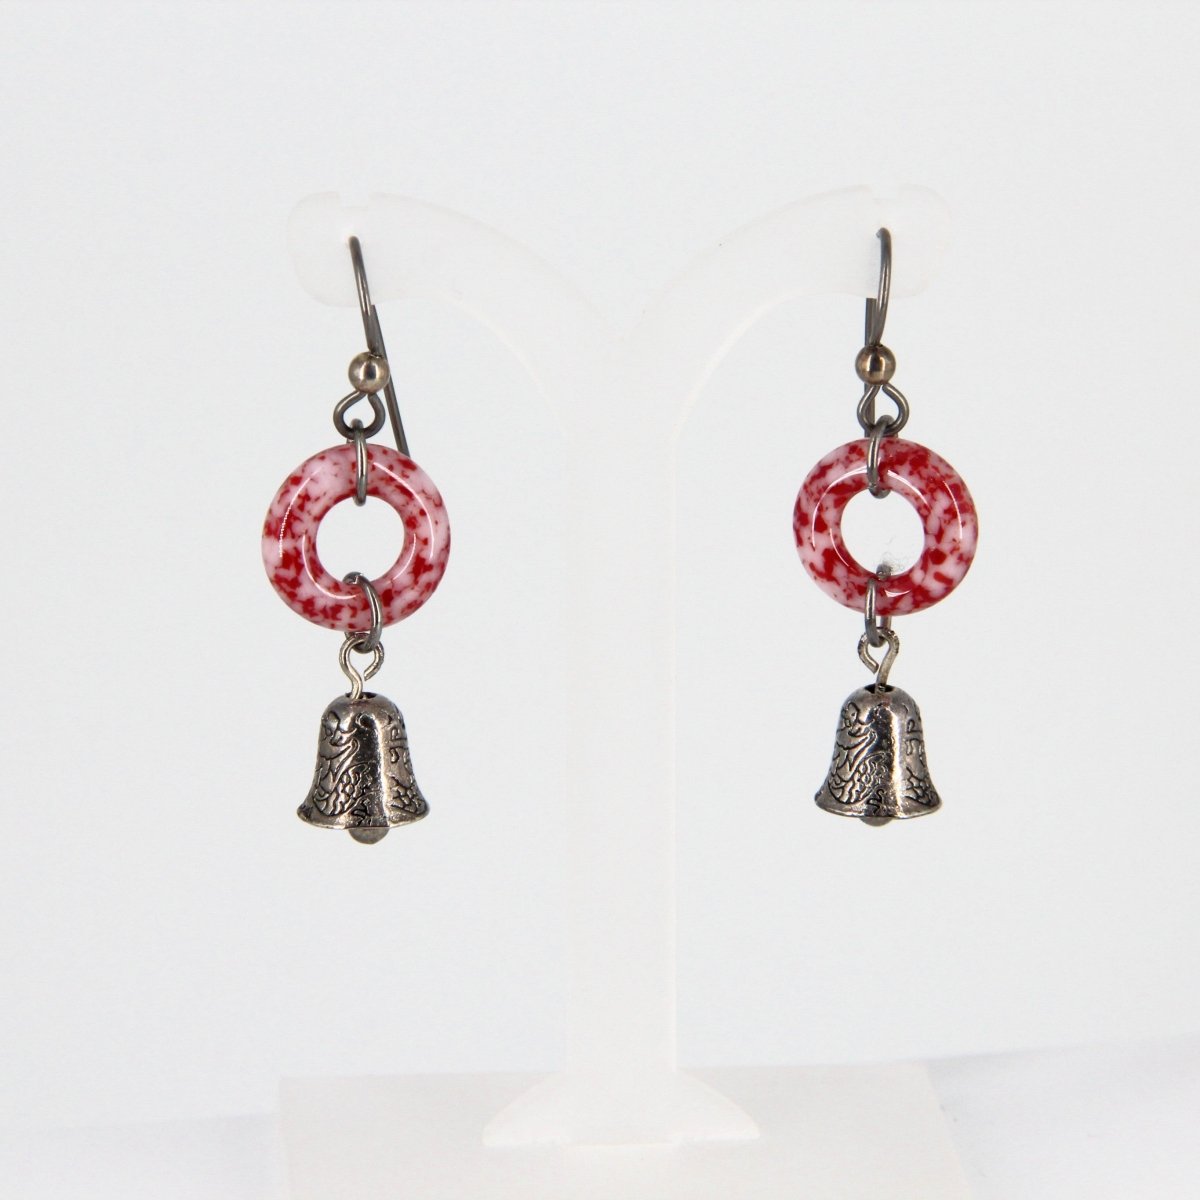 Red and White Glass Dangle Earrings with Bell Charm